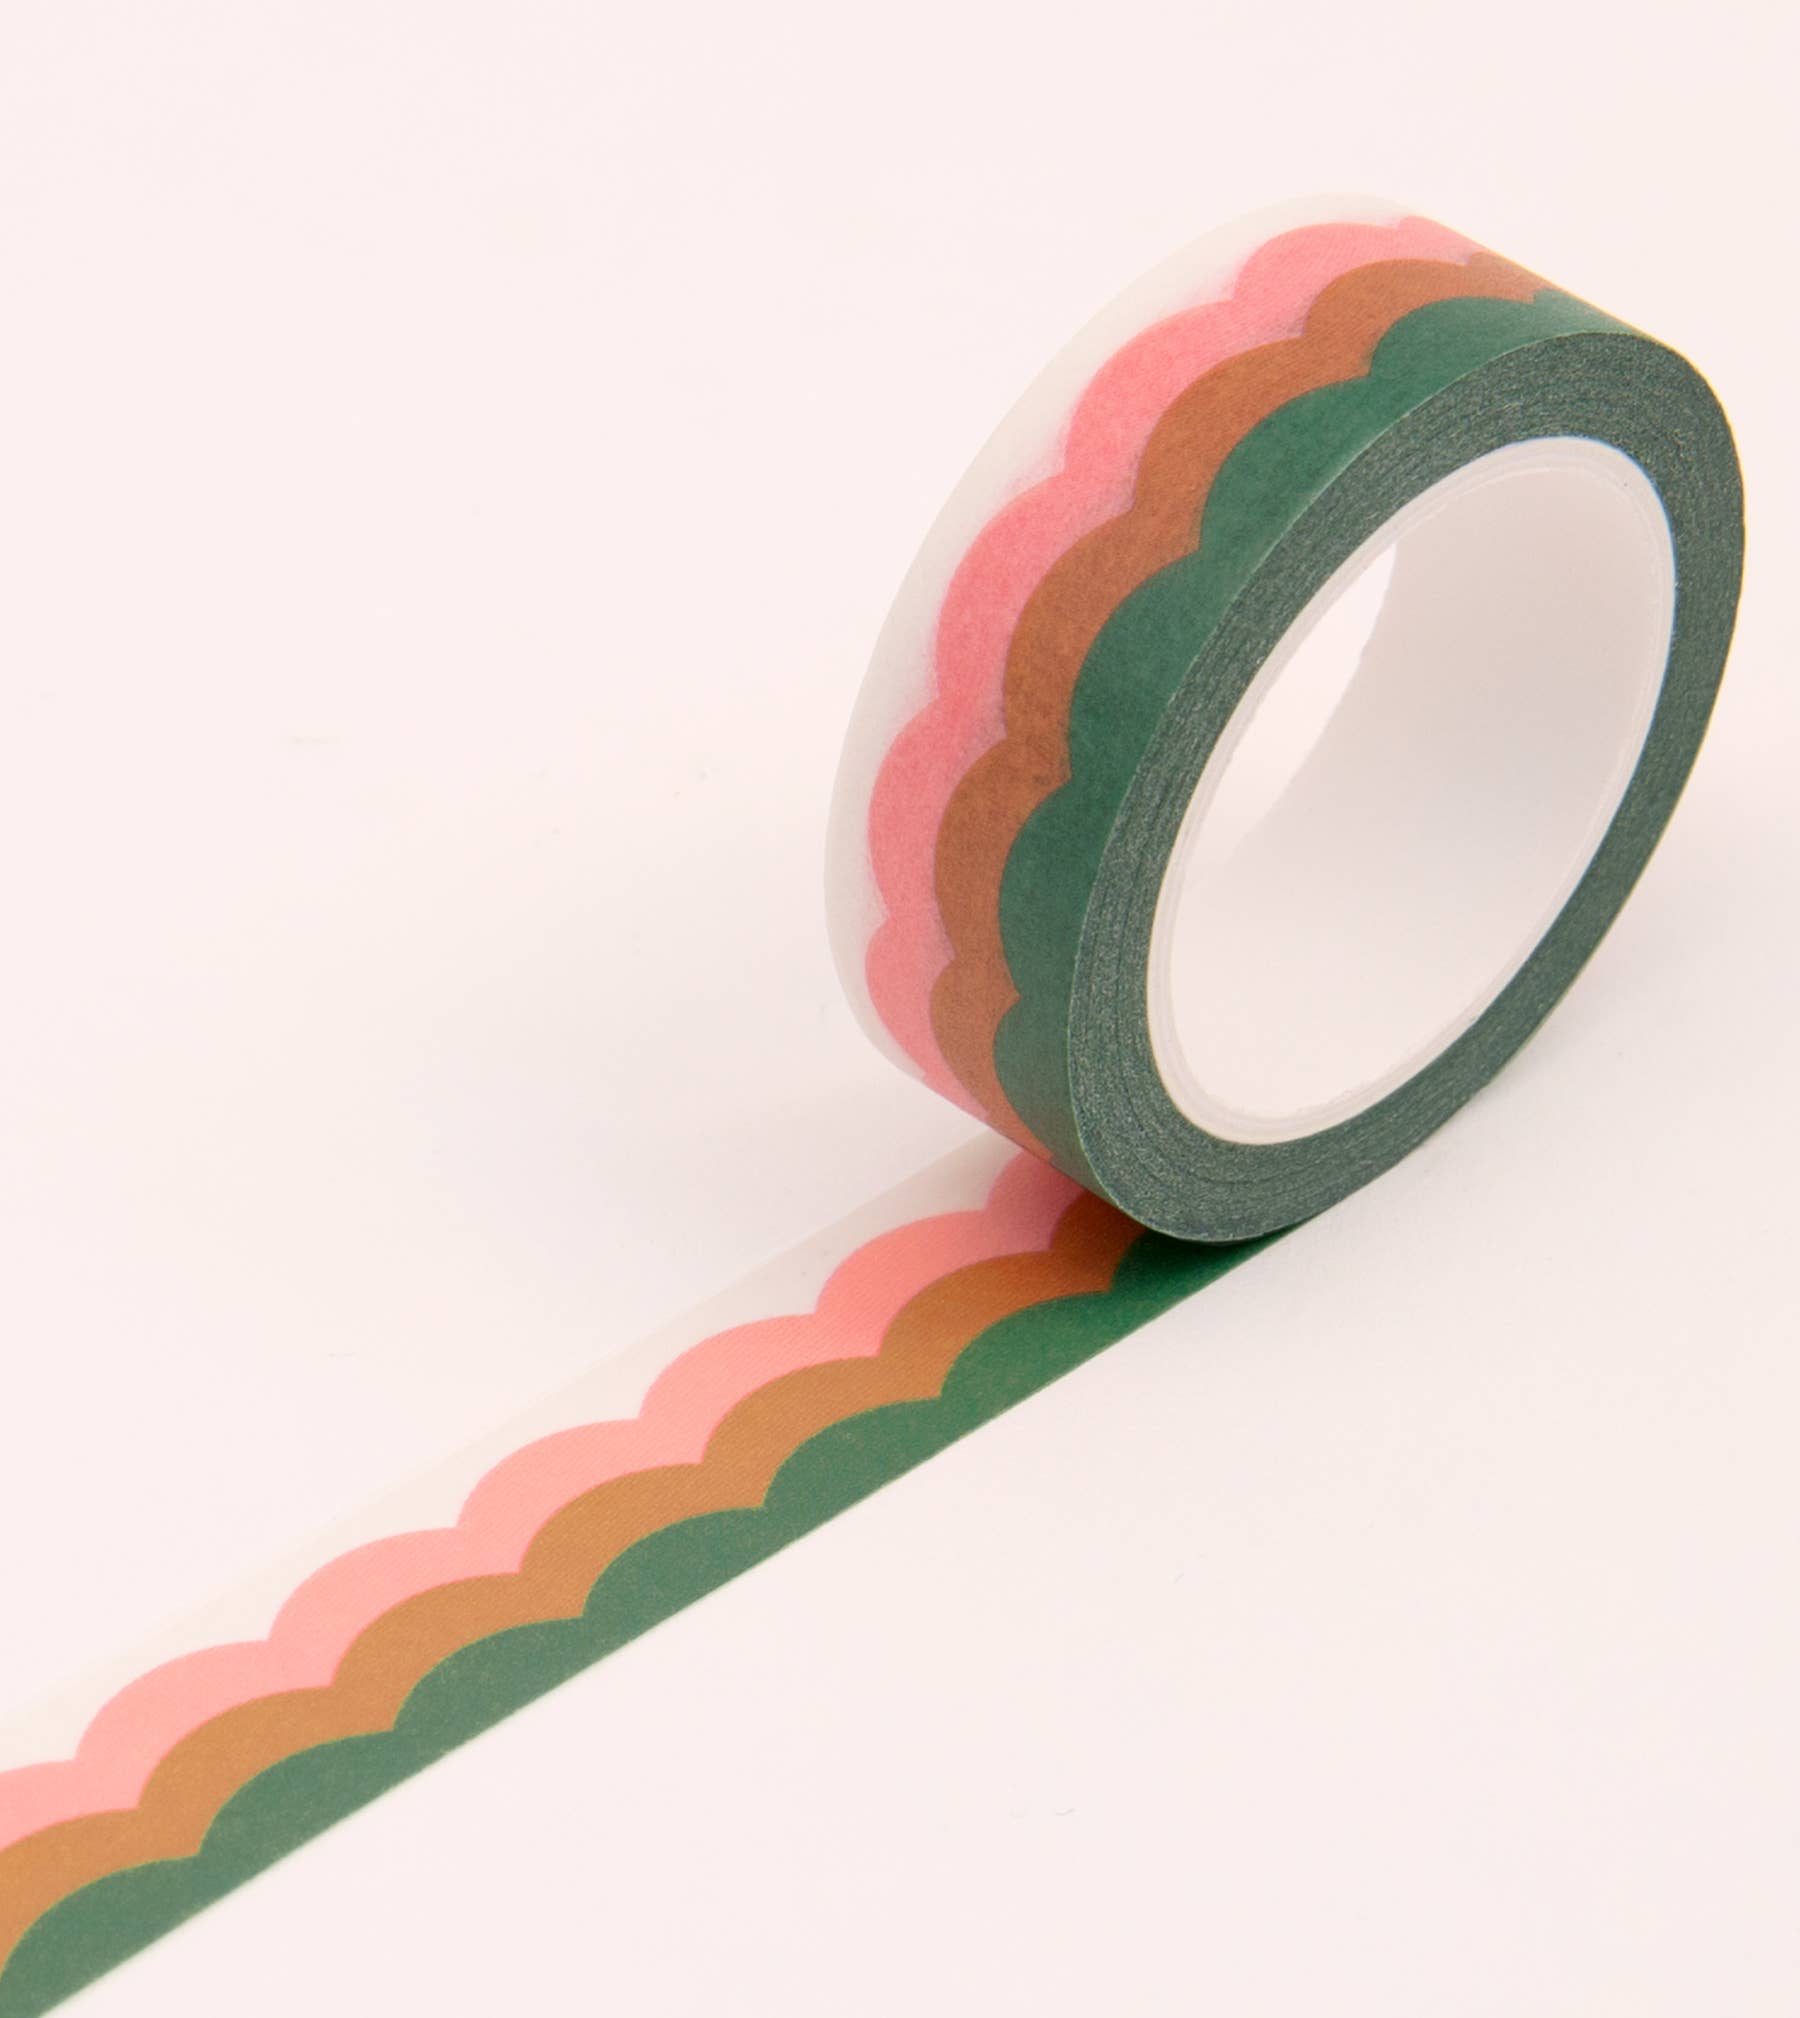 Scallop Pattern Washi Tape - Green and Pink - 15mm - The Crowd Went Wild